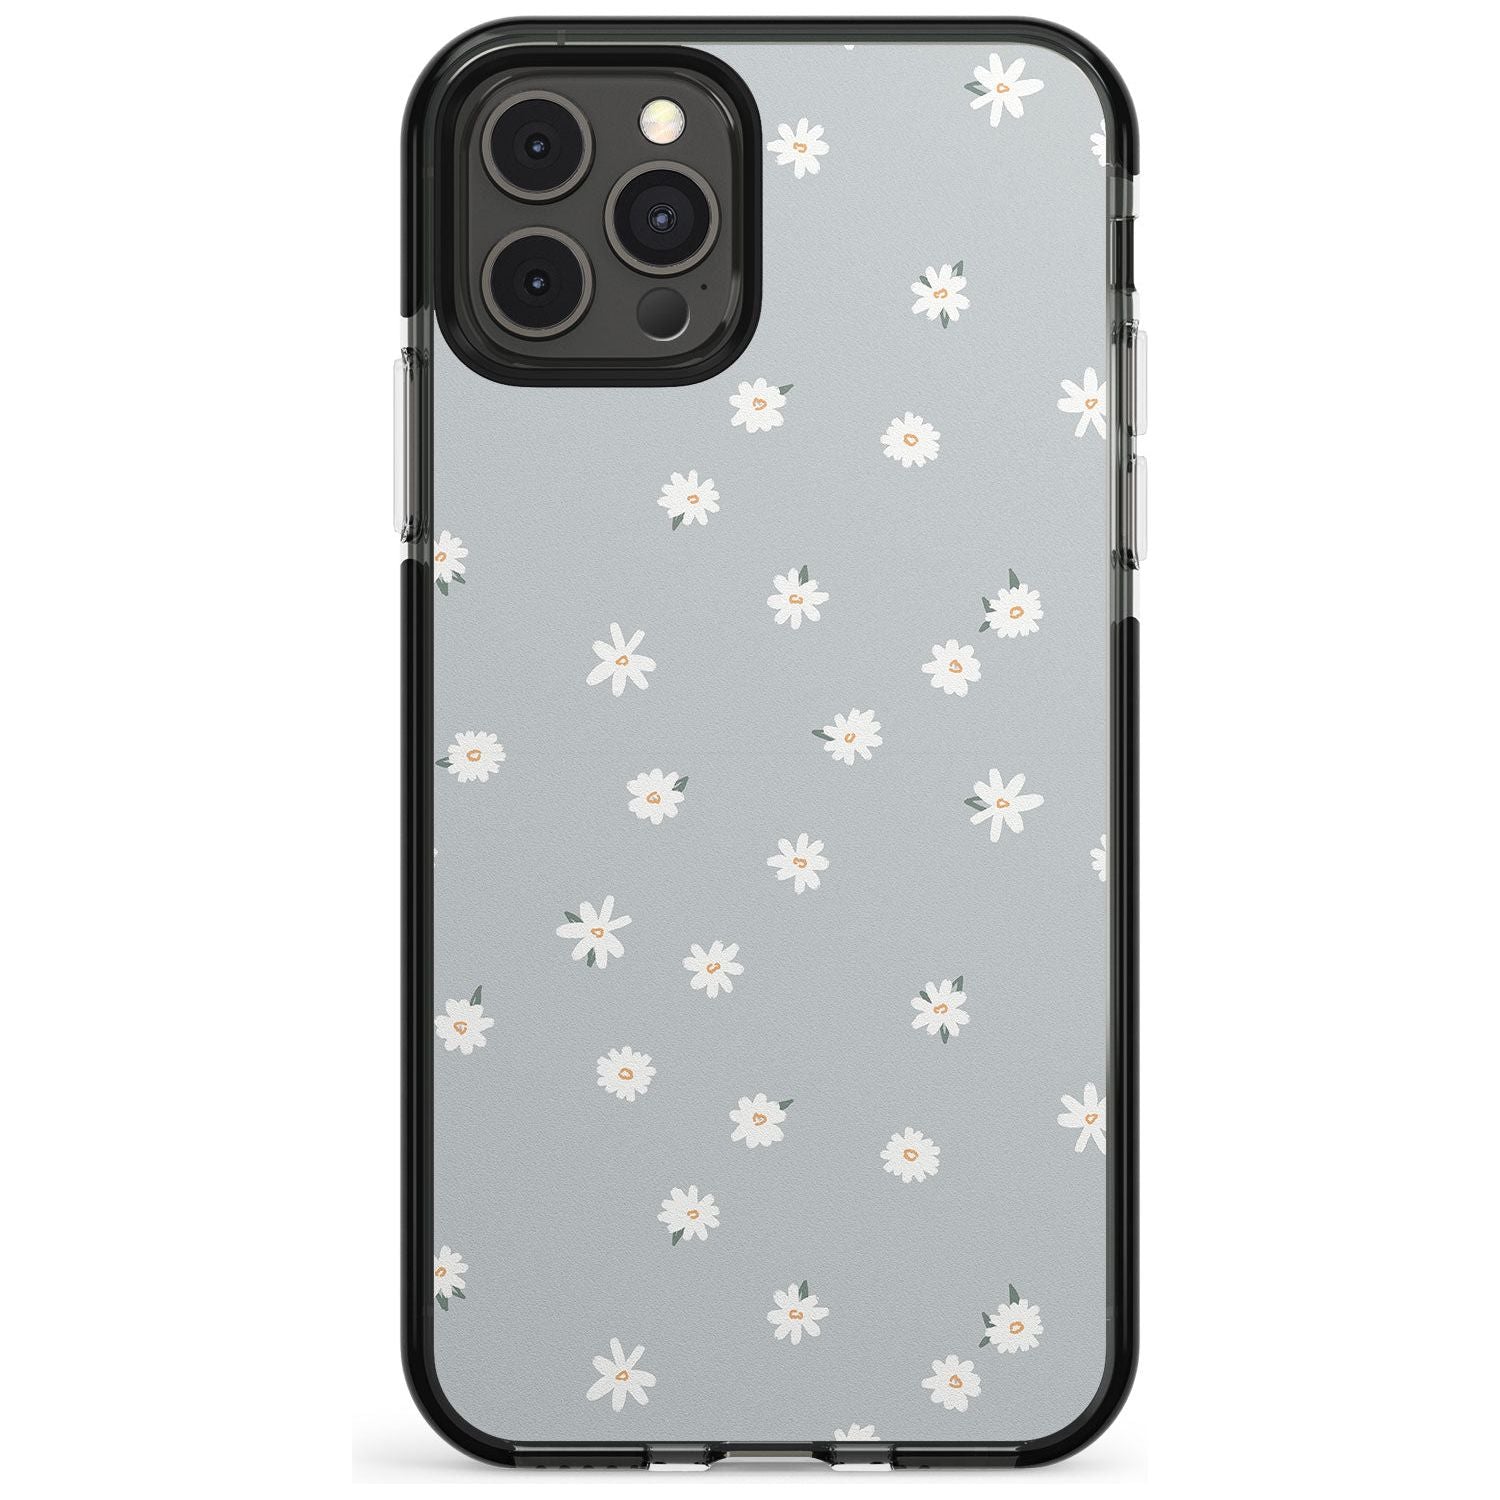 Painted Daises - Blue-Grey Cute Floral Design Pink Fade Impact Phone Case for iPhone 11